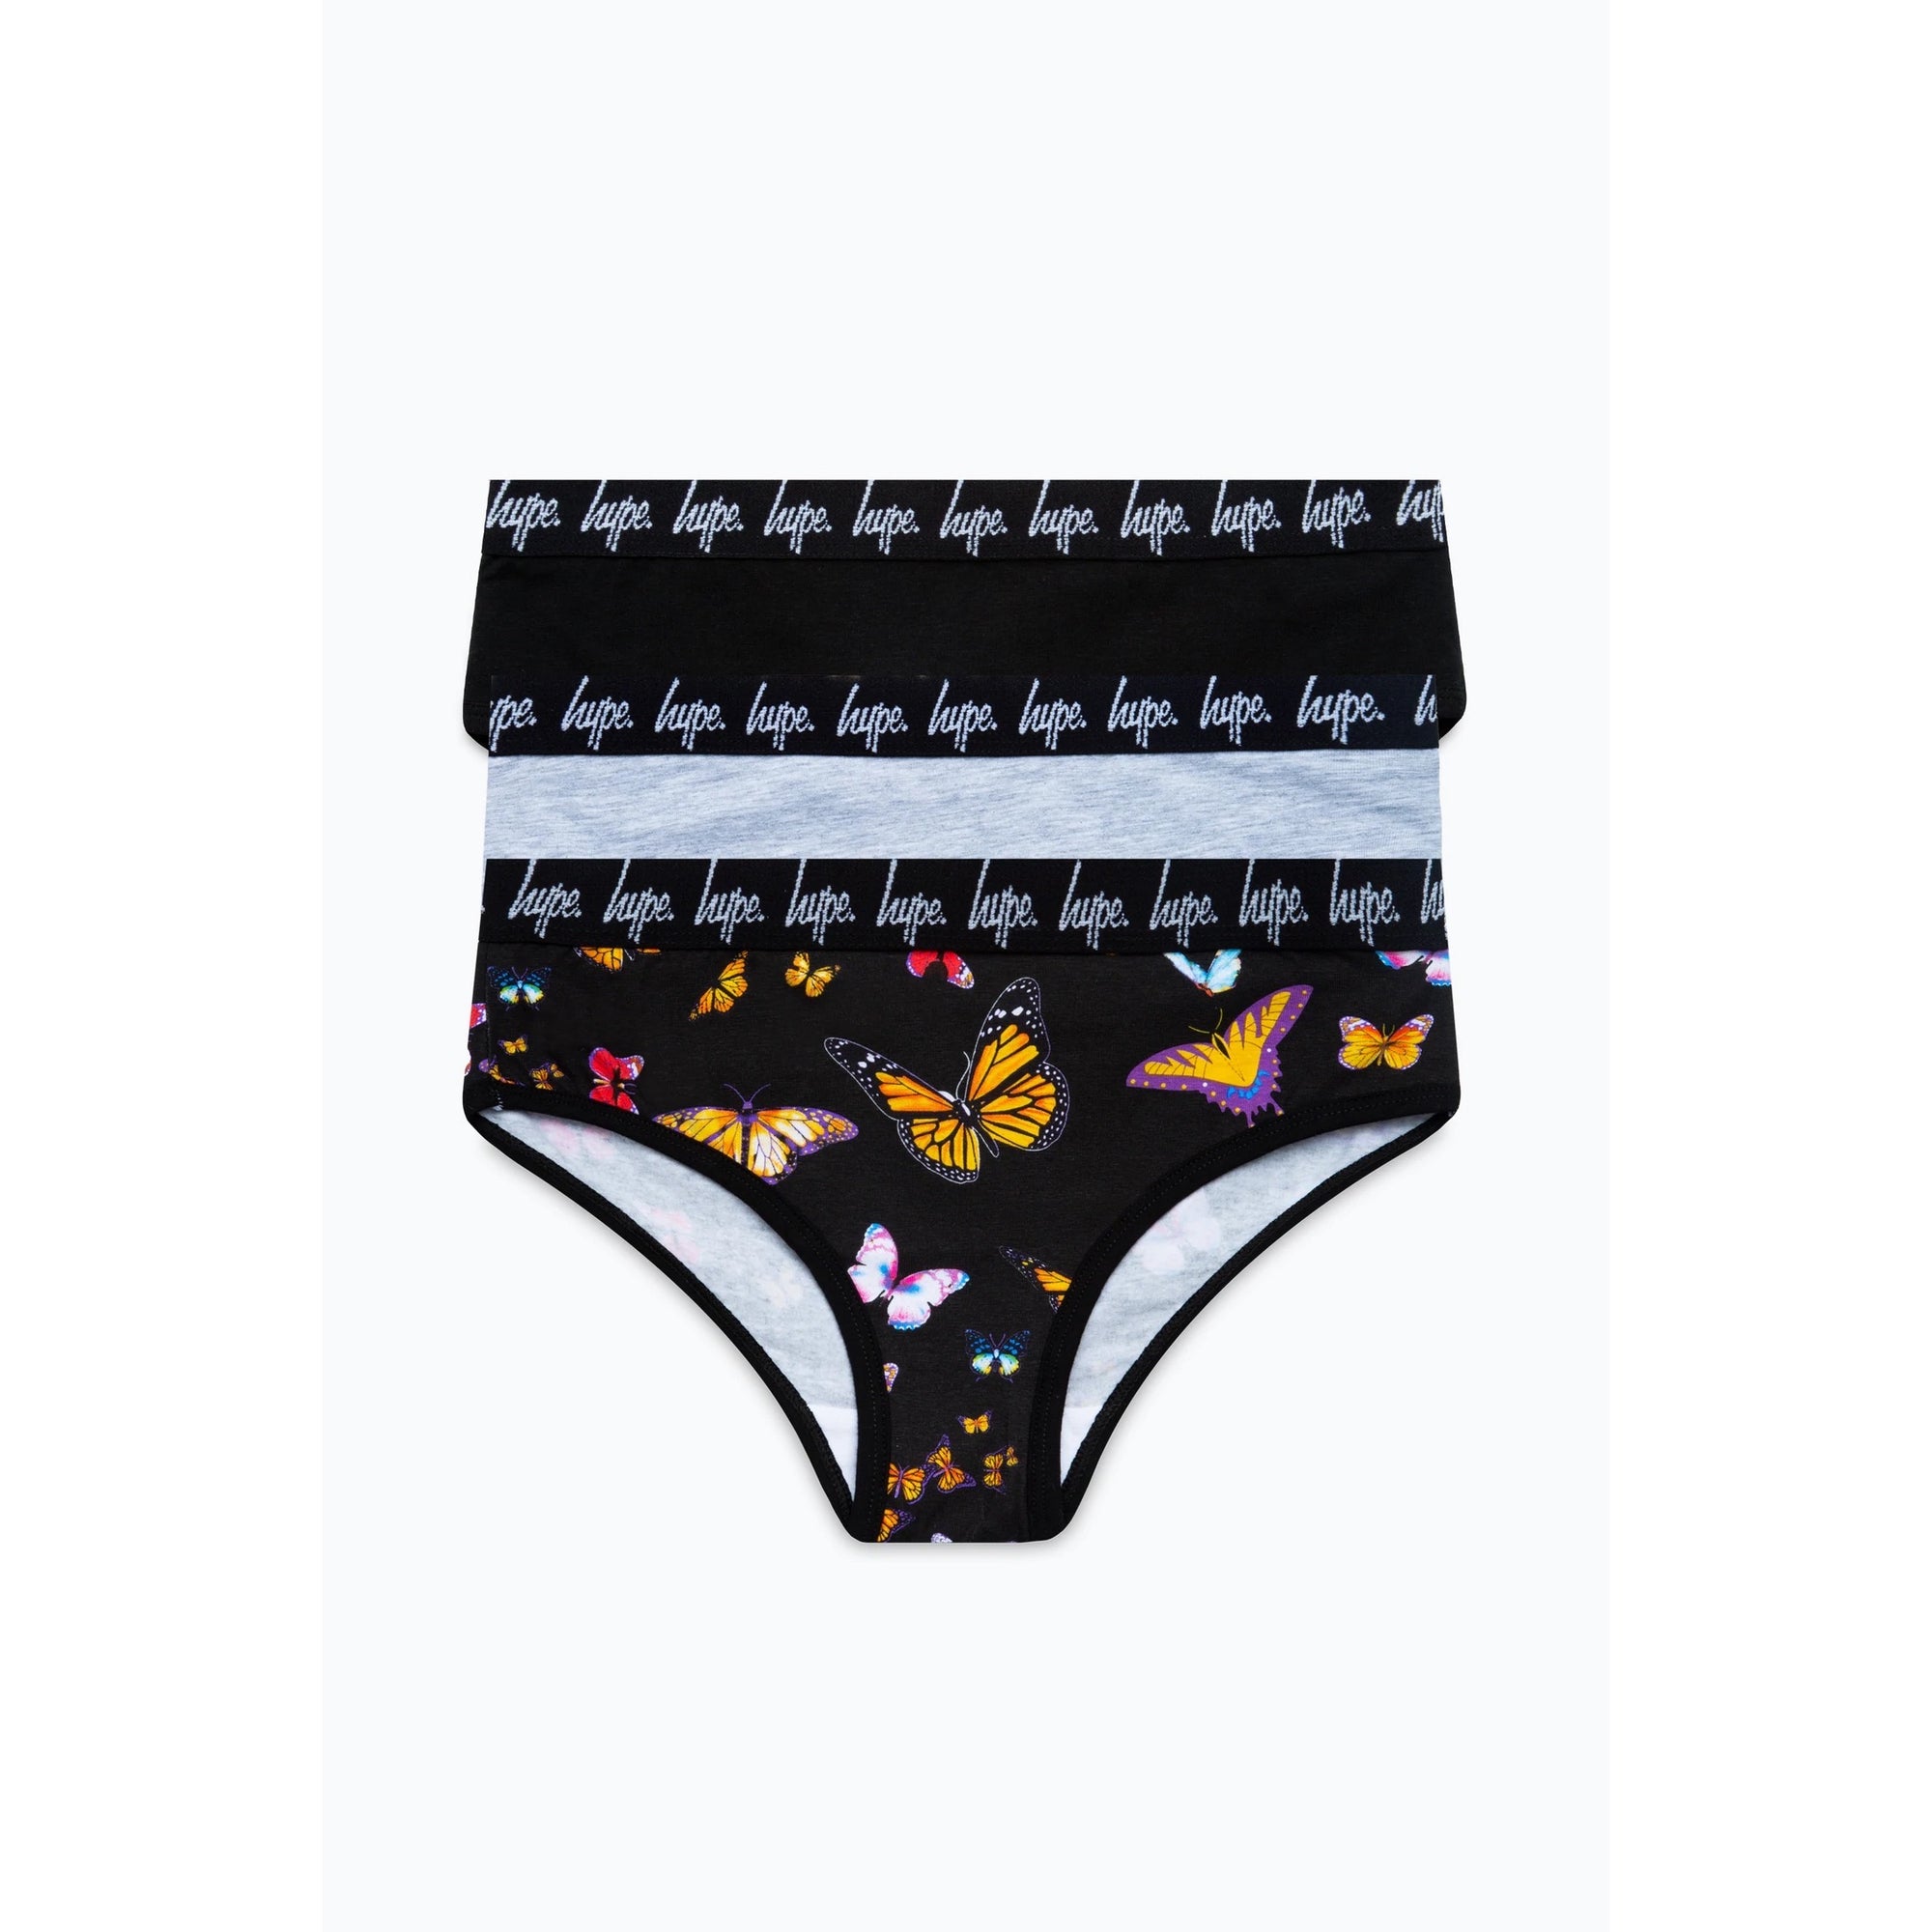 Hype 3 Pack Butterfly Briefs Twbt328 Clothing 7-8YRS / Black,9-10YRS / Black,11-12YRS / Black